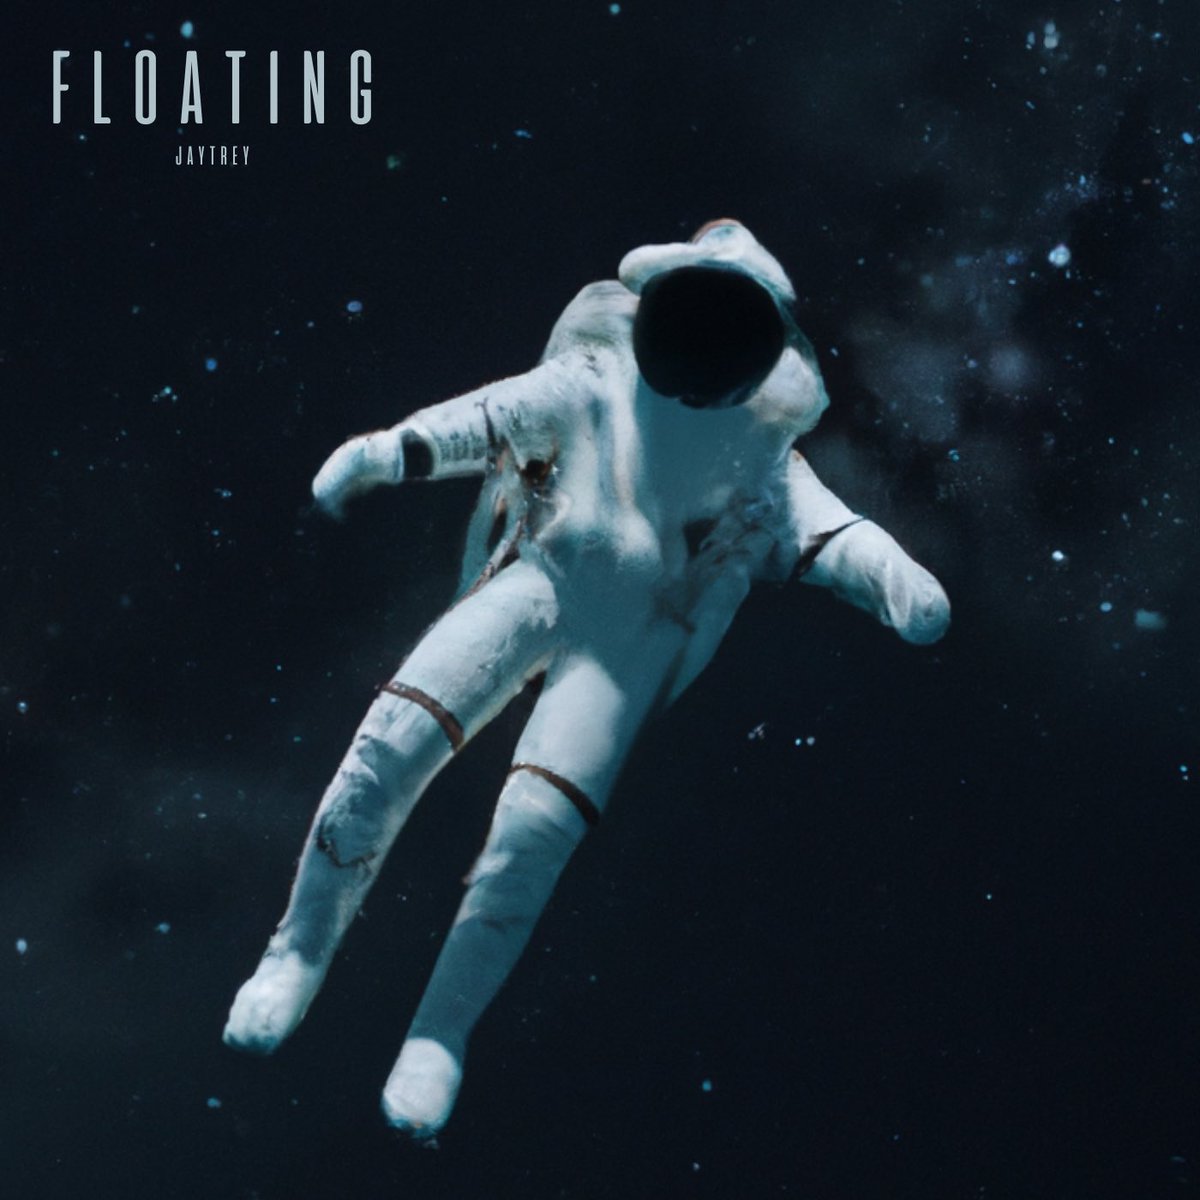 Another new @jaytrey42 single called “Floating” produced by @ant_church24 is out now on all platforms! 🚀 Check out the track via the link here 👉 distrokid.com/hyperfollow/ja…